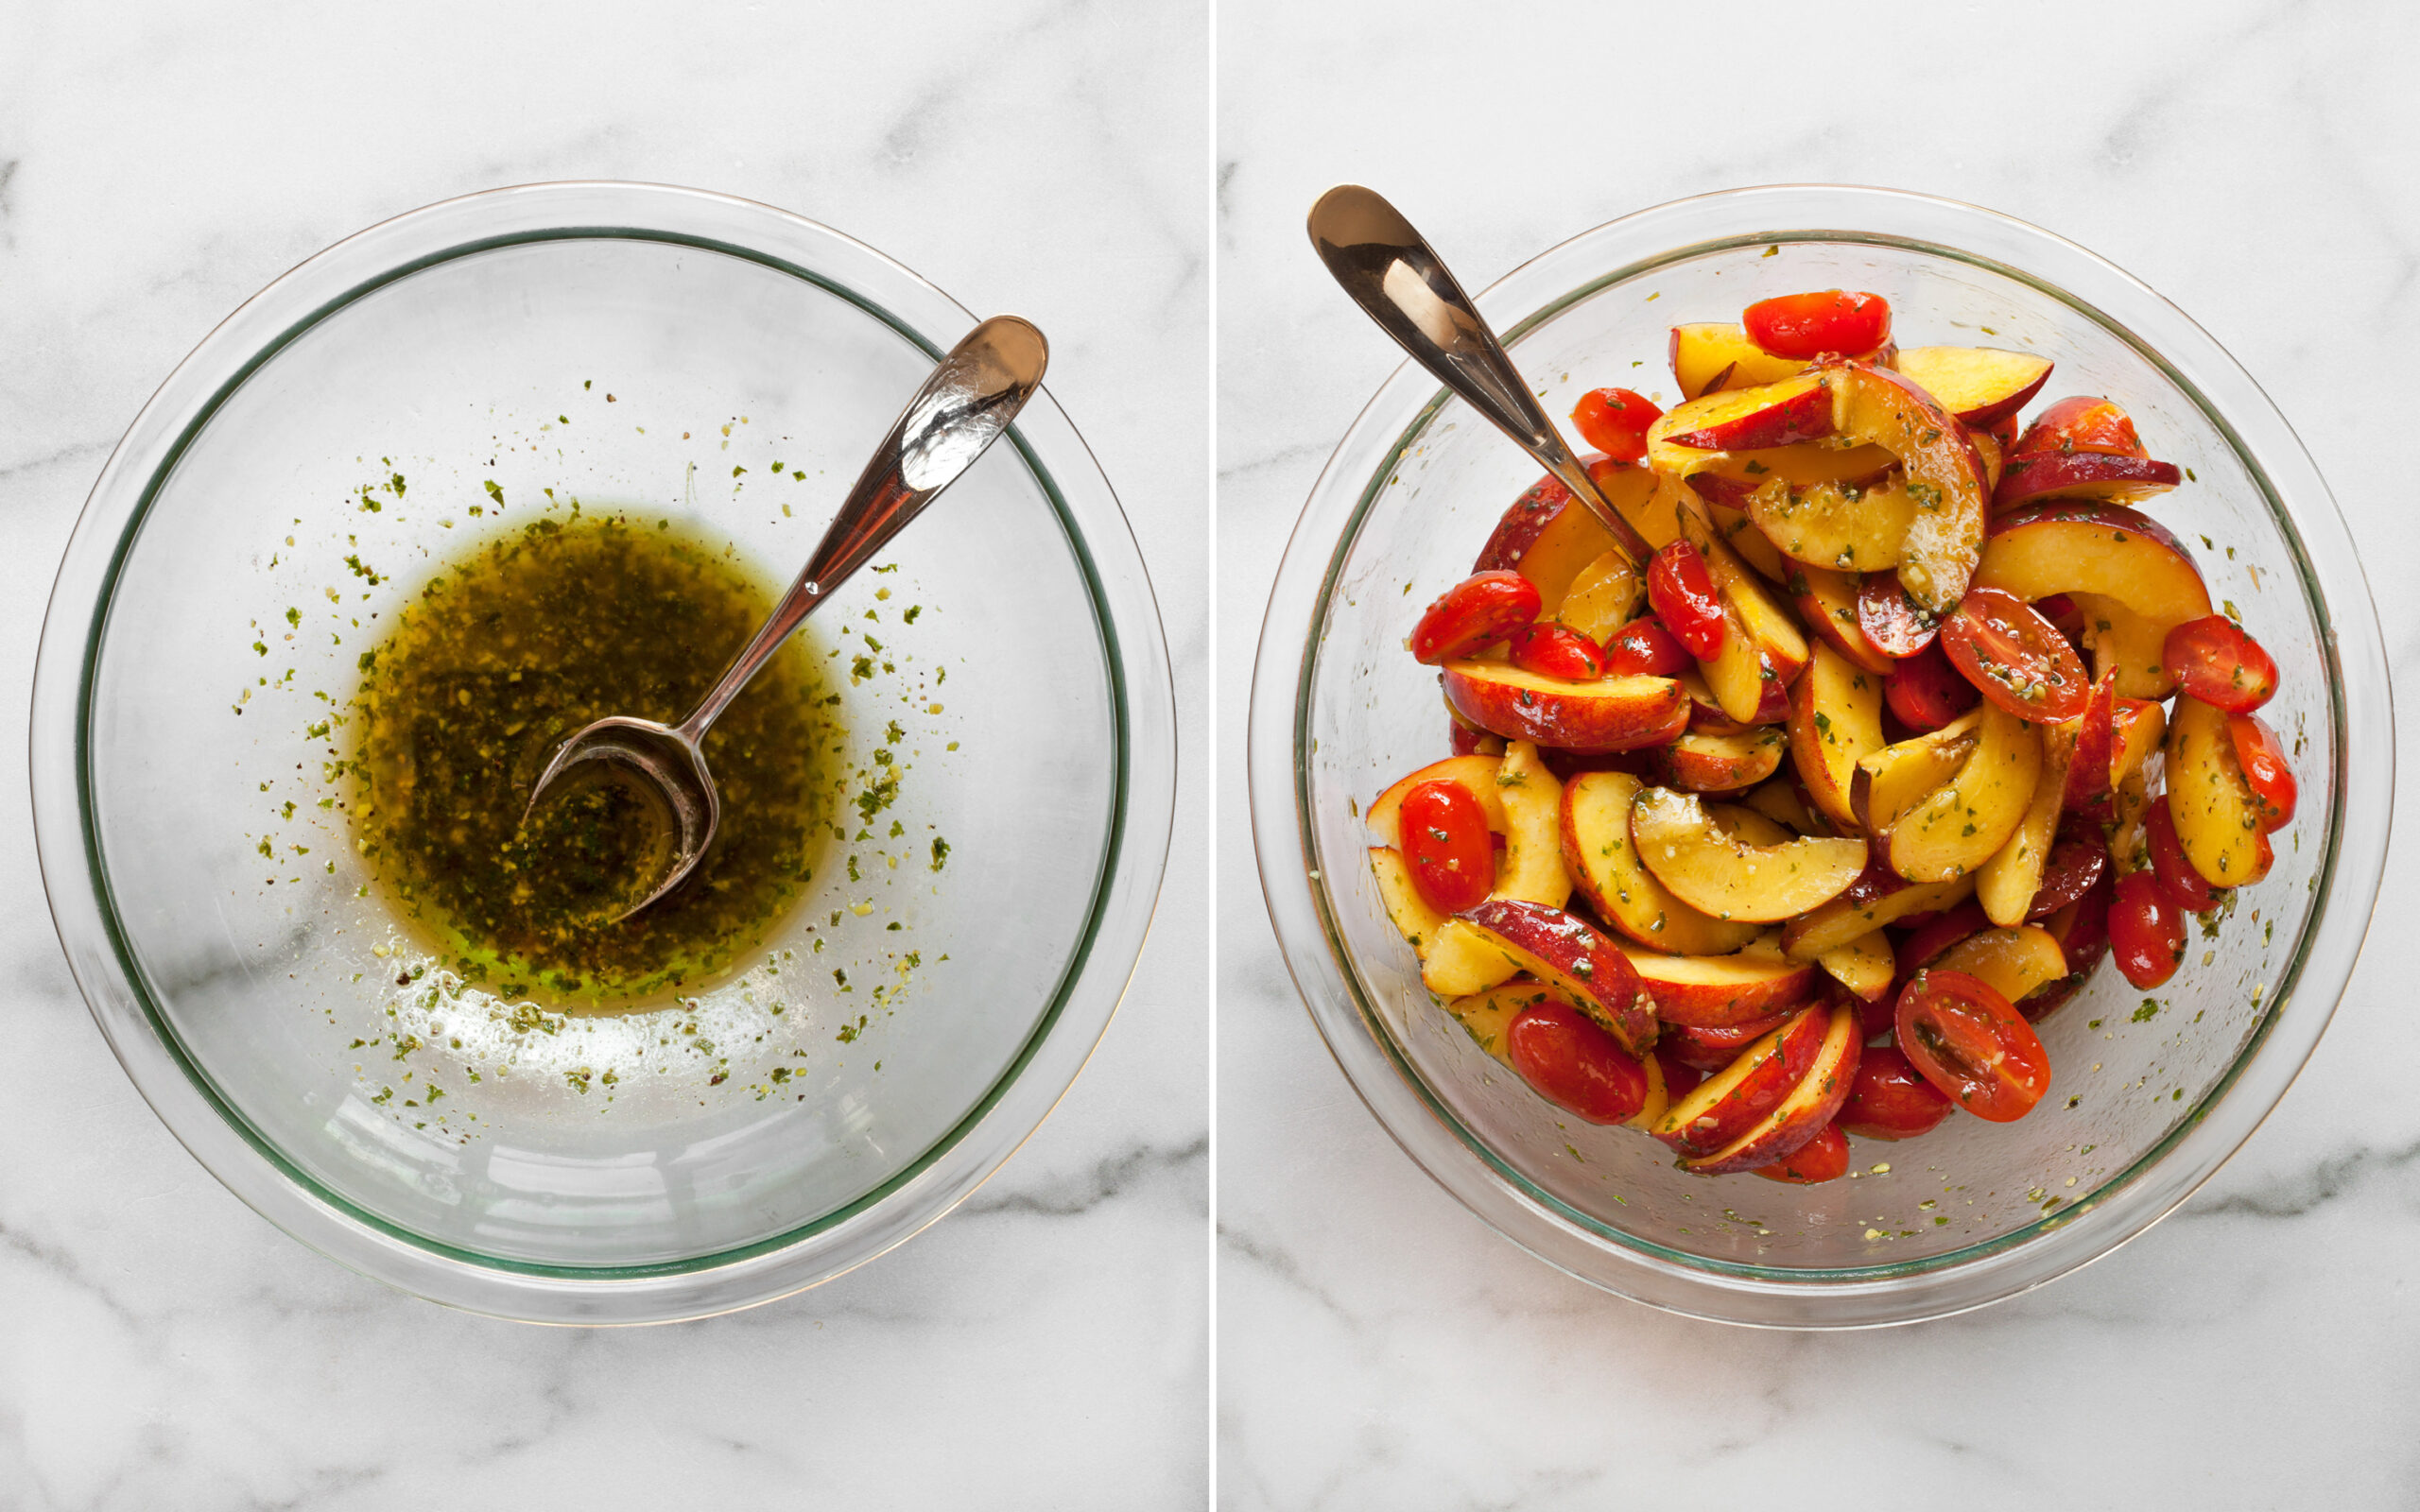 Whisk the pesto vinaigrette in a large bowl. Then atir in the tomatoes and peaches.